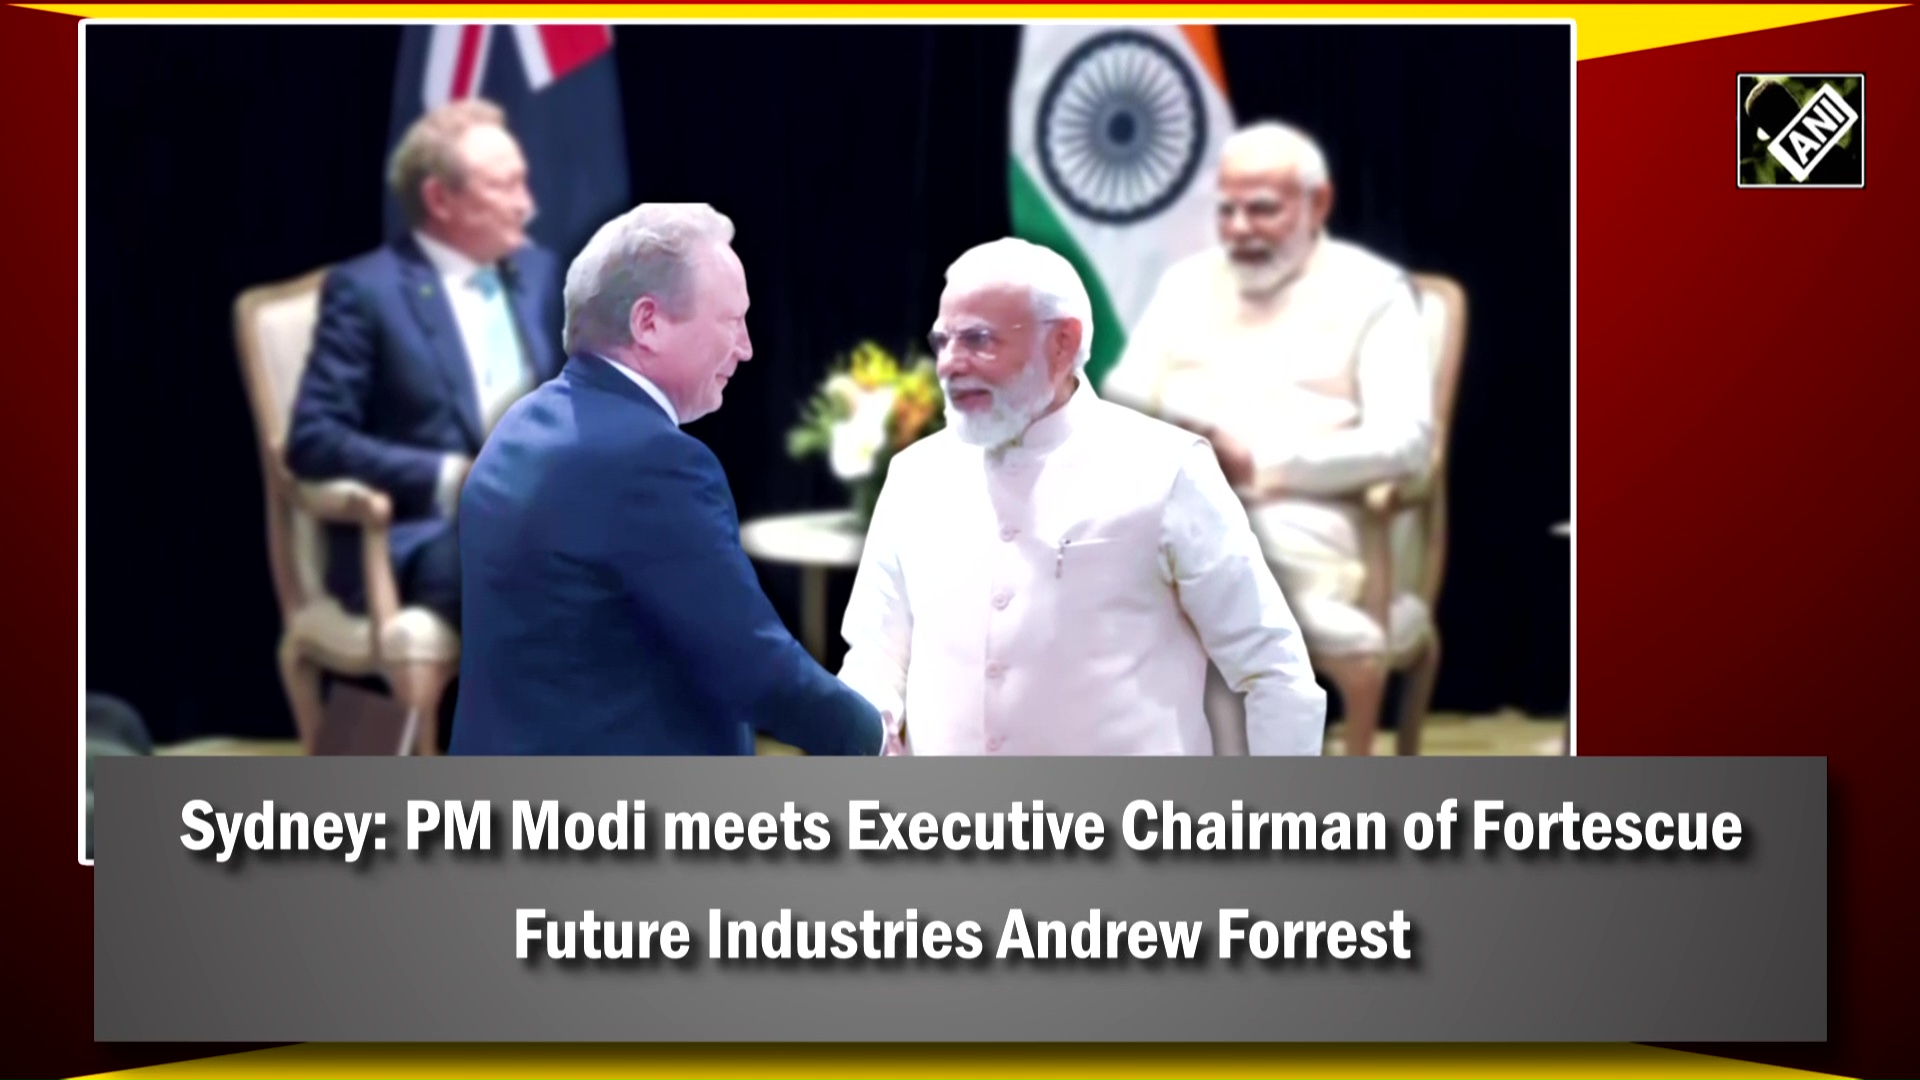 Sydney: PM Modi meets Executive Chairman of Fortescue Future Industries Andrew Forrest